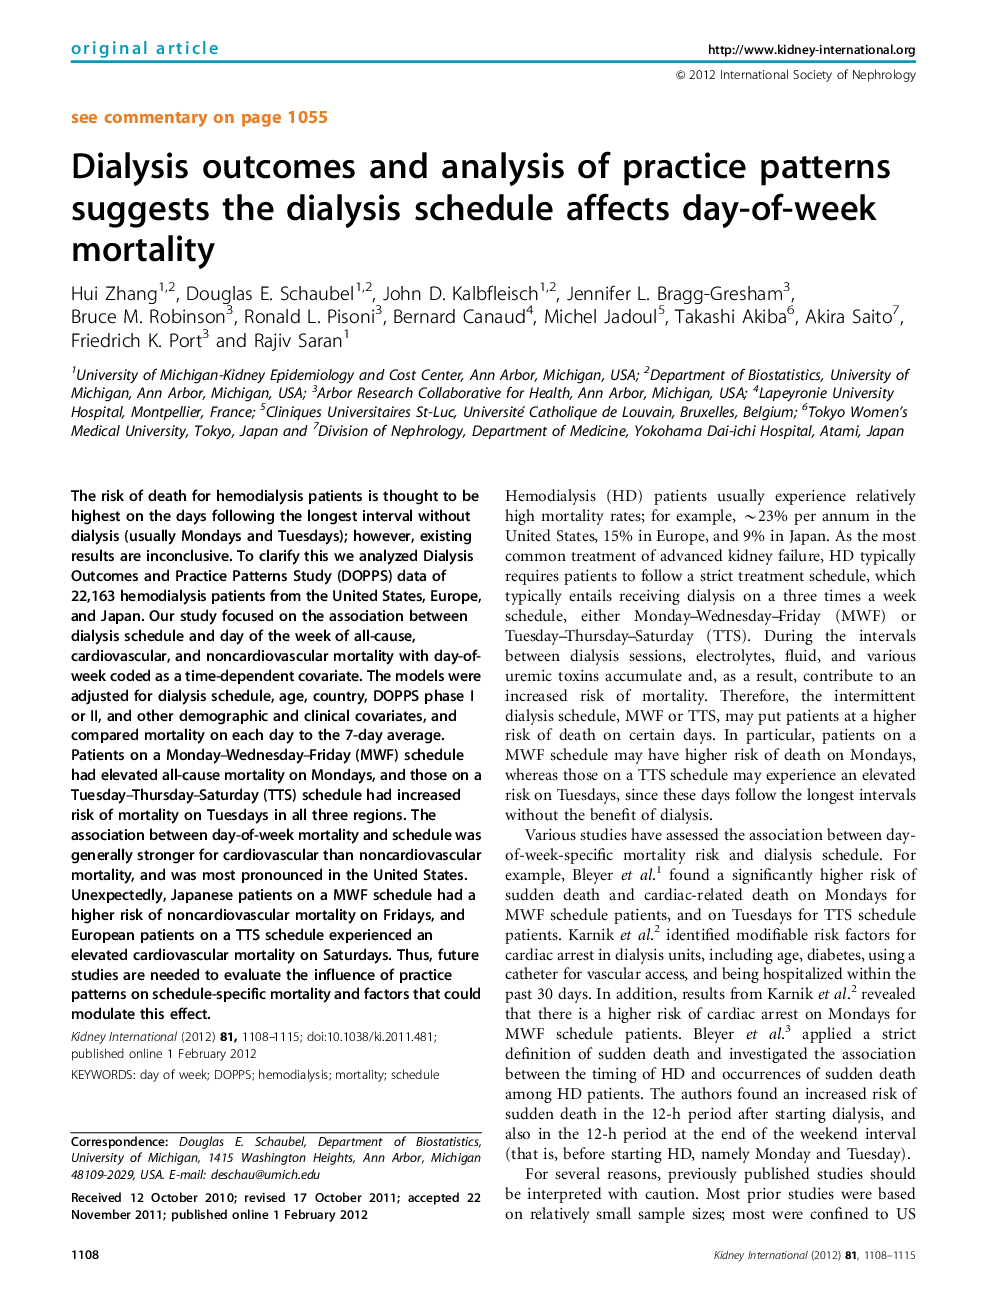 Dialysis outcomes and analysis of practice patterns suggests the dialysis schedule affects day-of-week mortality 